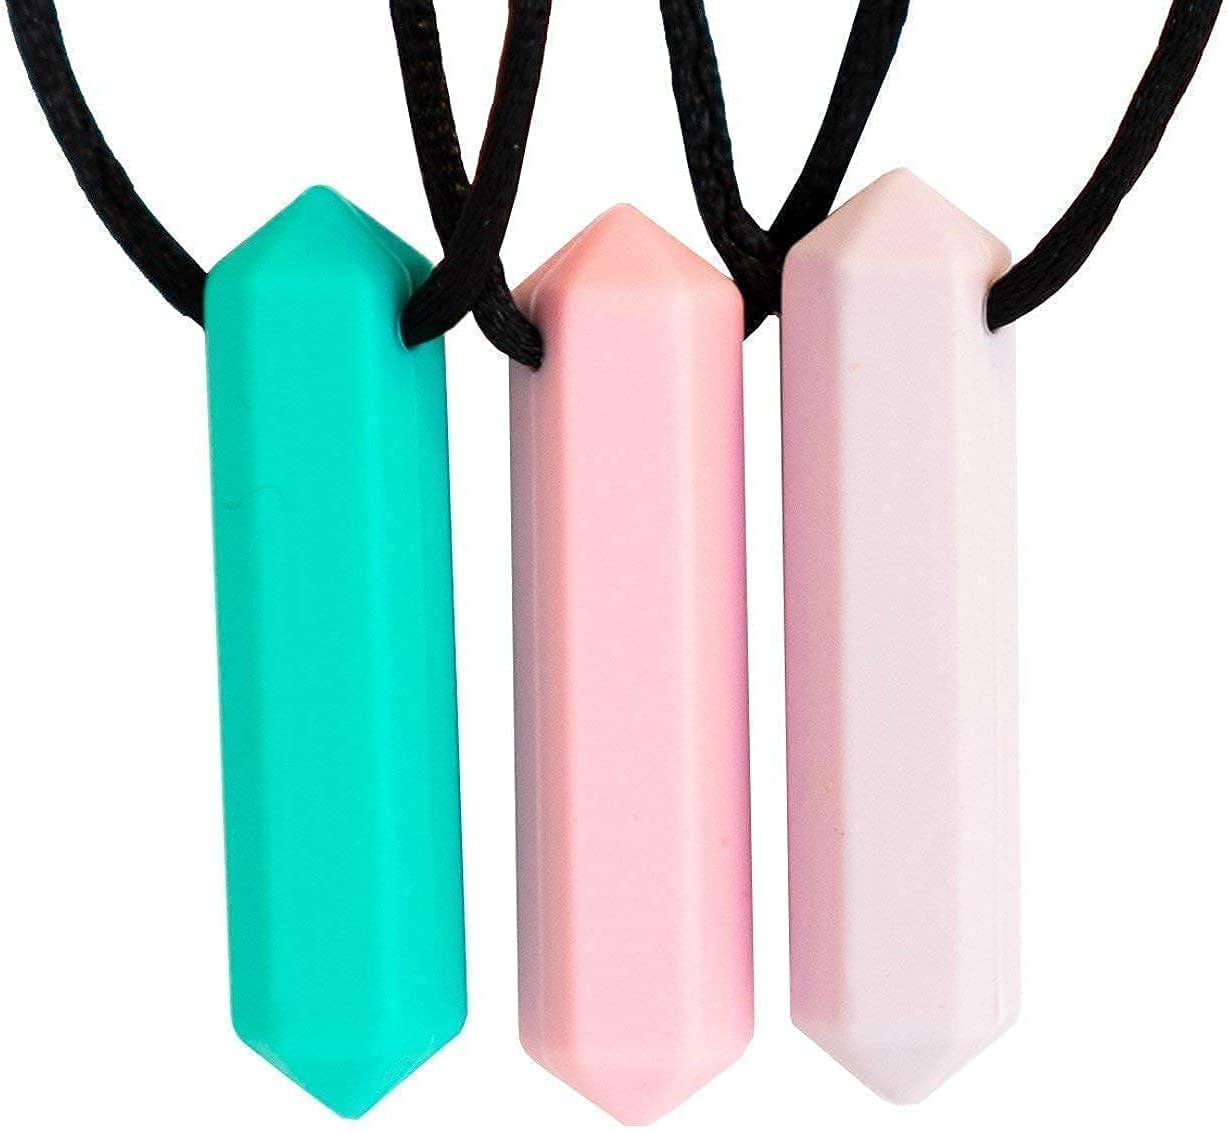 SENSORY CHEW NECKLACE Silicone Anxiety Relief Chewy Necklace Teeth Shape 5p  Xmas $13.32 - PicClick AU